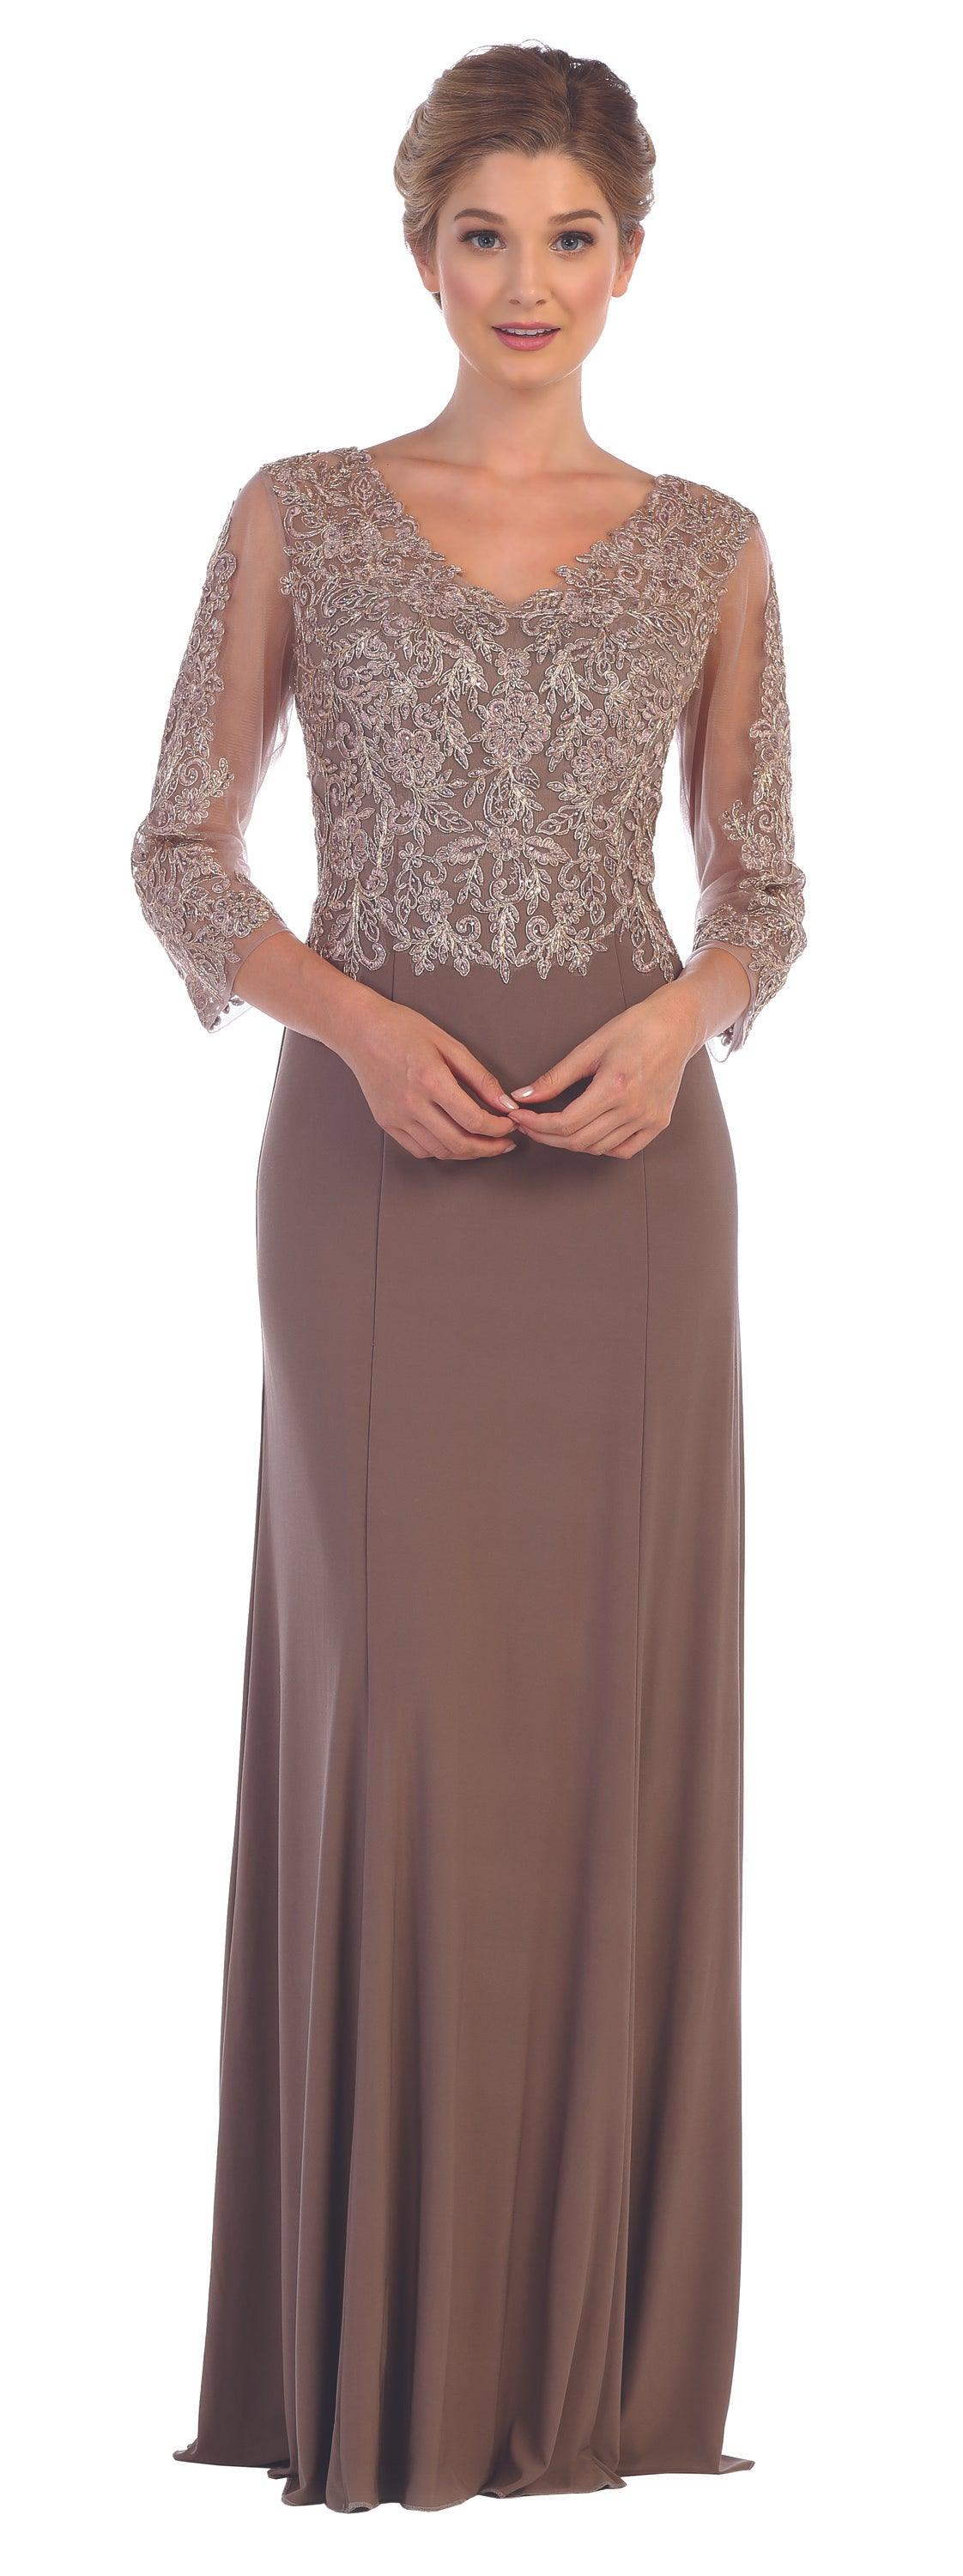 Long Mother of the Bride Long Sleeve Formal Dress - The Dress Outlet